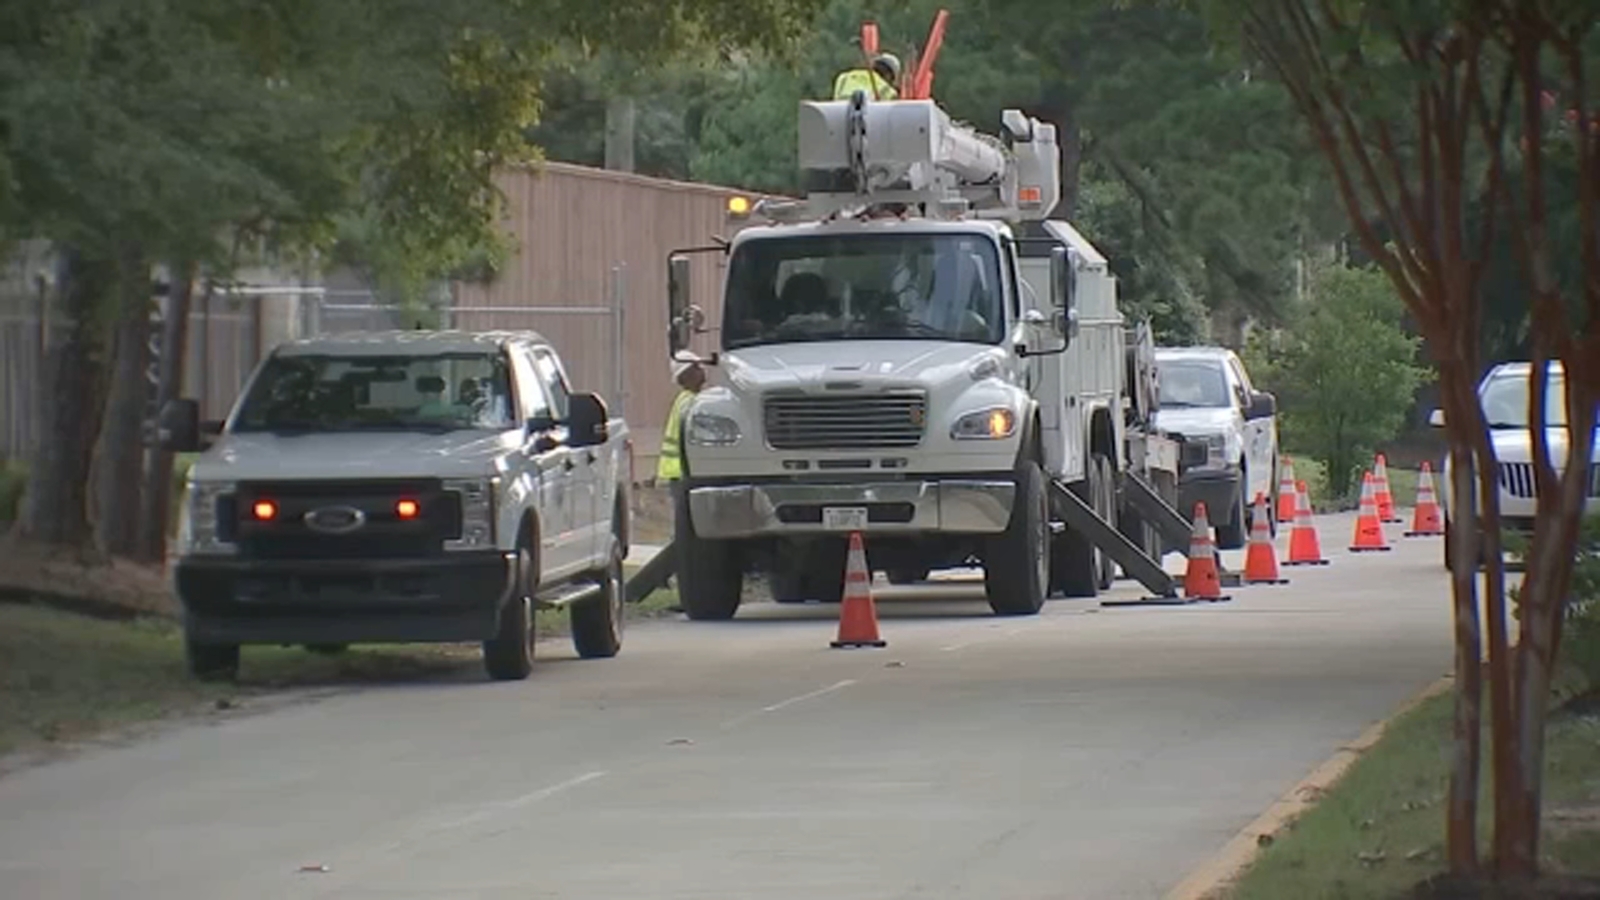 Houston-area power outages: Thousands of CenterPoint Energy customers without power amid Severe Thunderstorm Watch [Video]